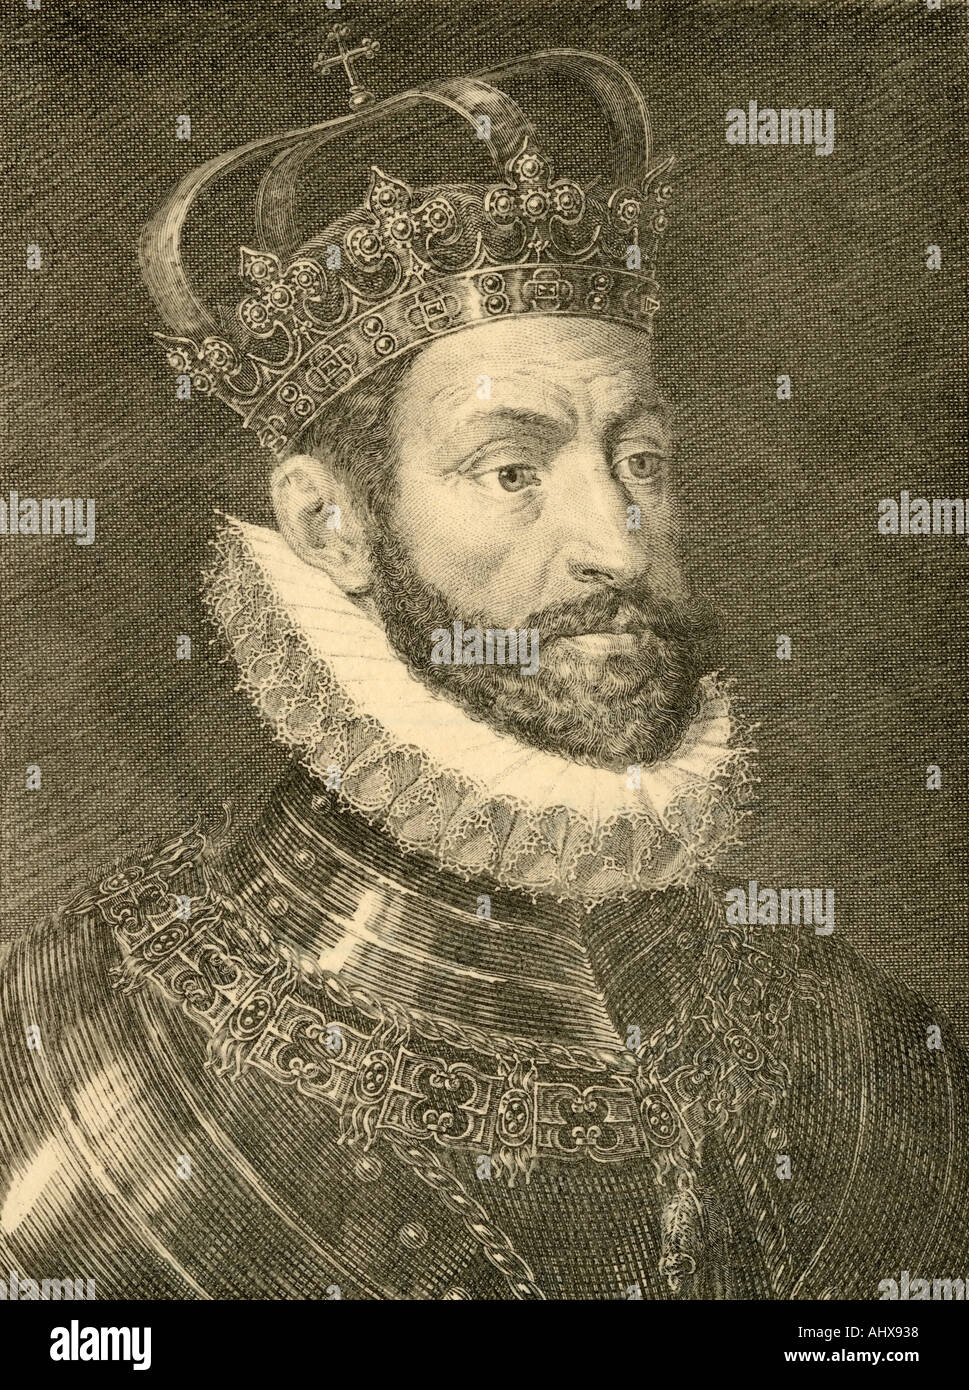 Charles V, 1500 - 1558.  Holy Roman Emperor, 1519 -1558 and as Charles I, King of Spain 1516 -1556. Stock Photo